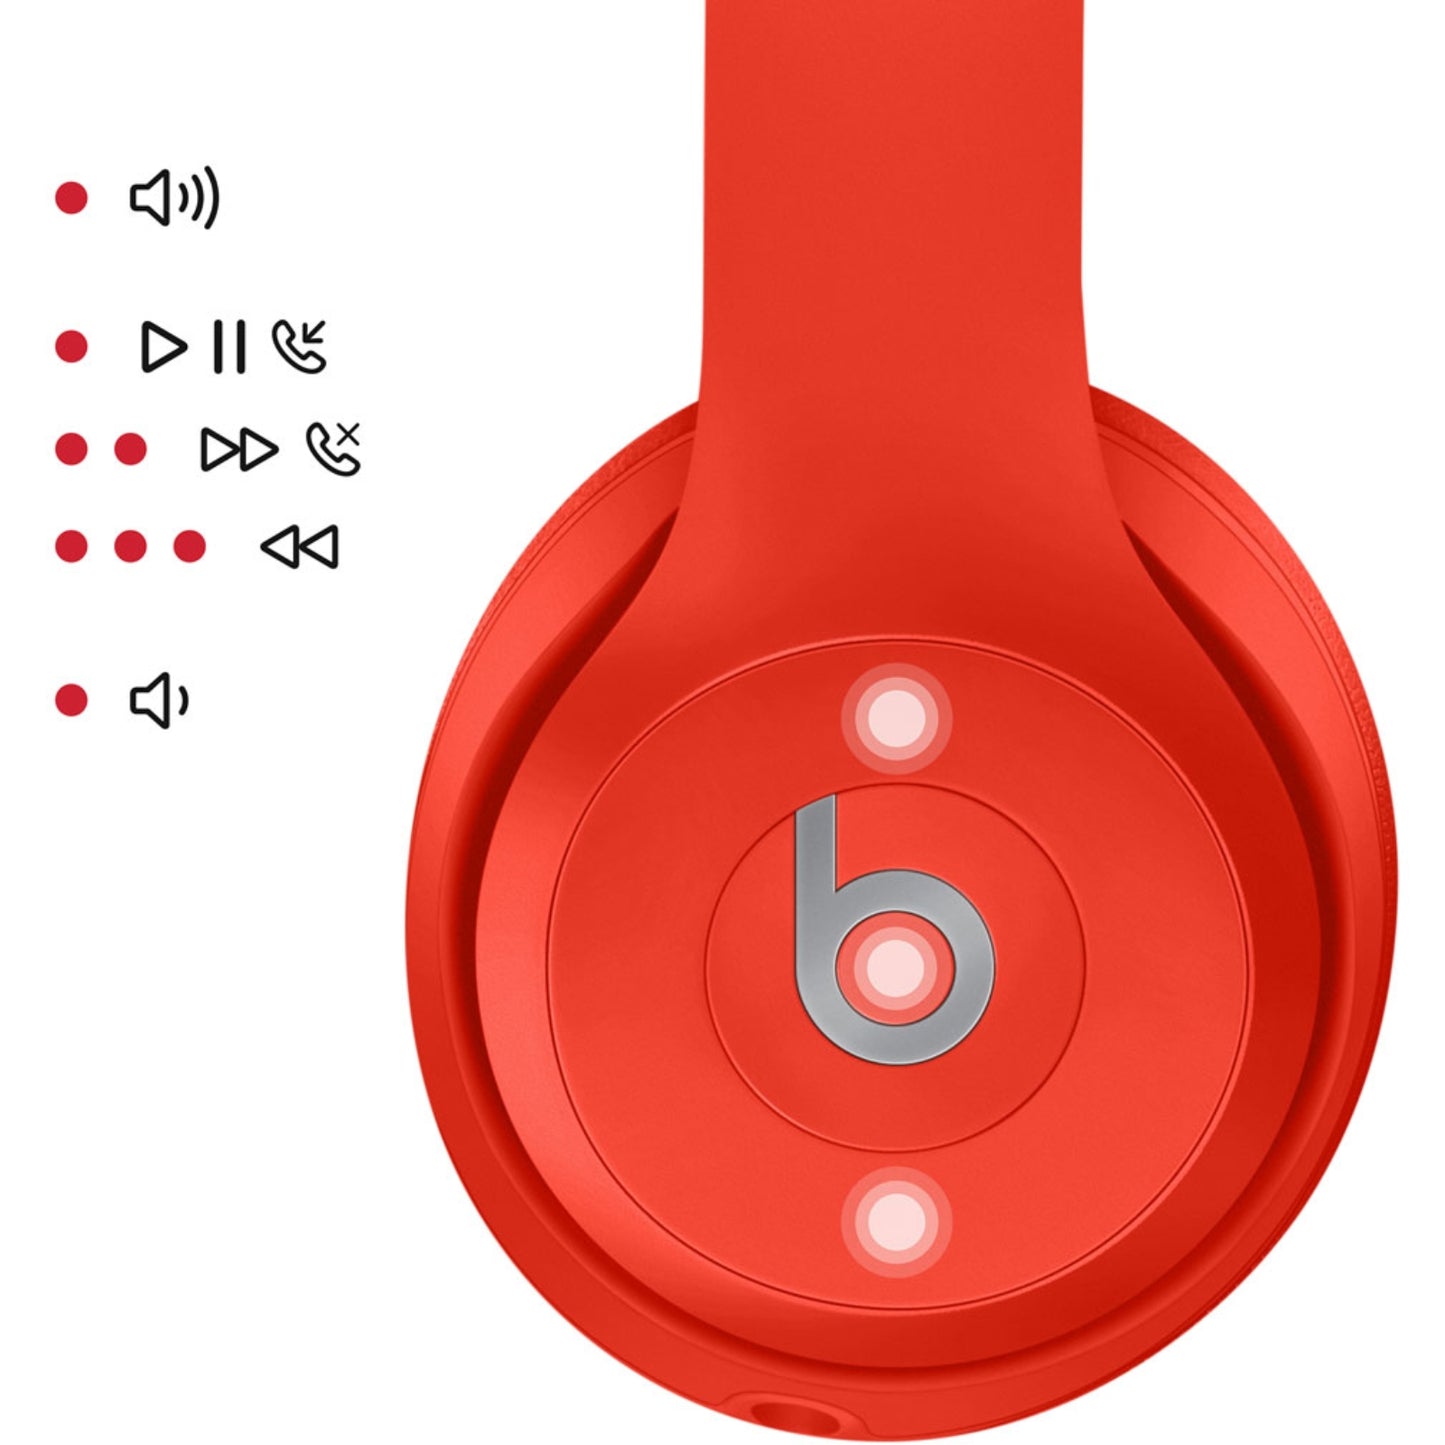 Beats Solo 3 Red - MyMobile